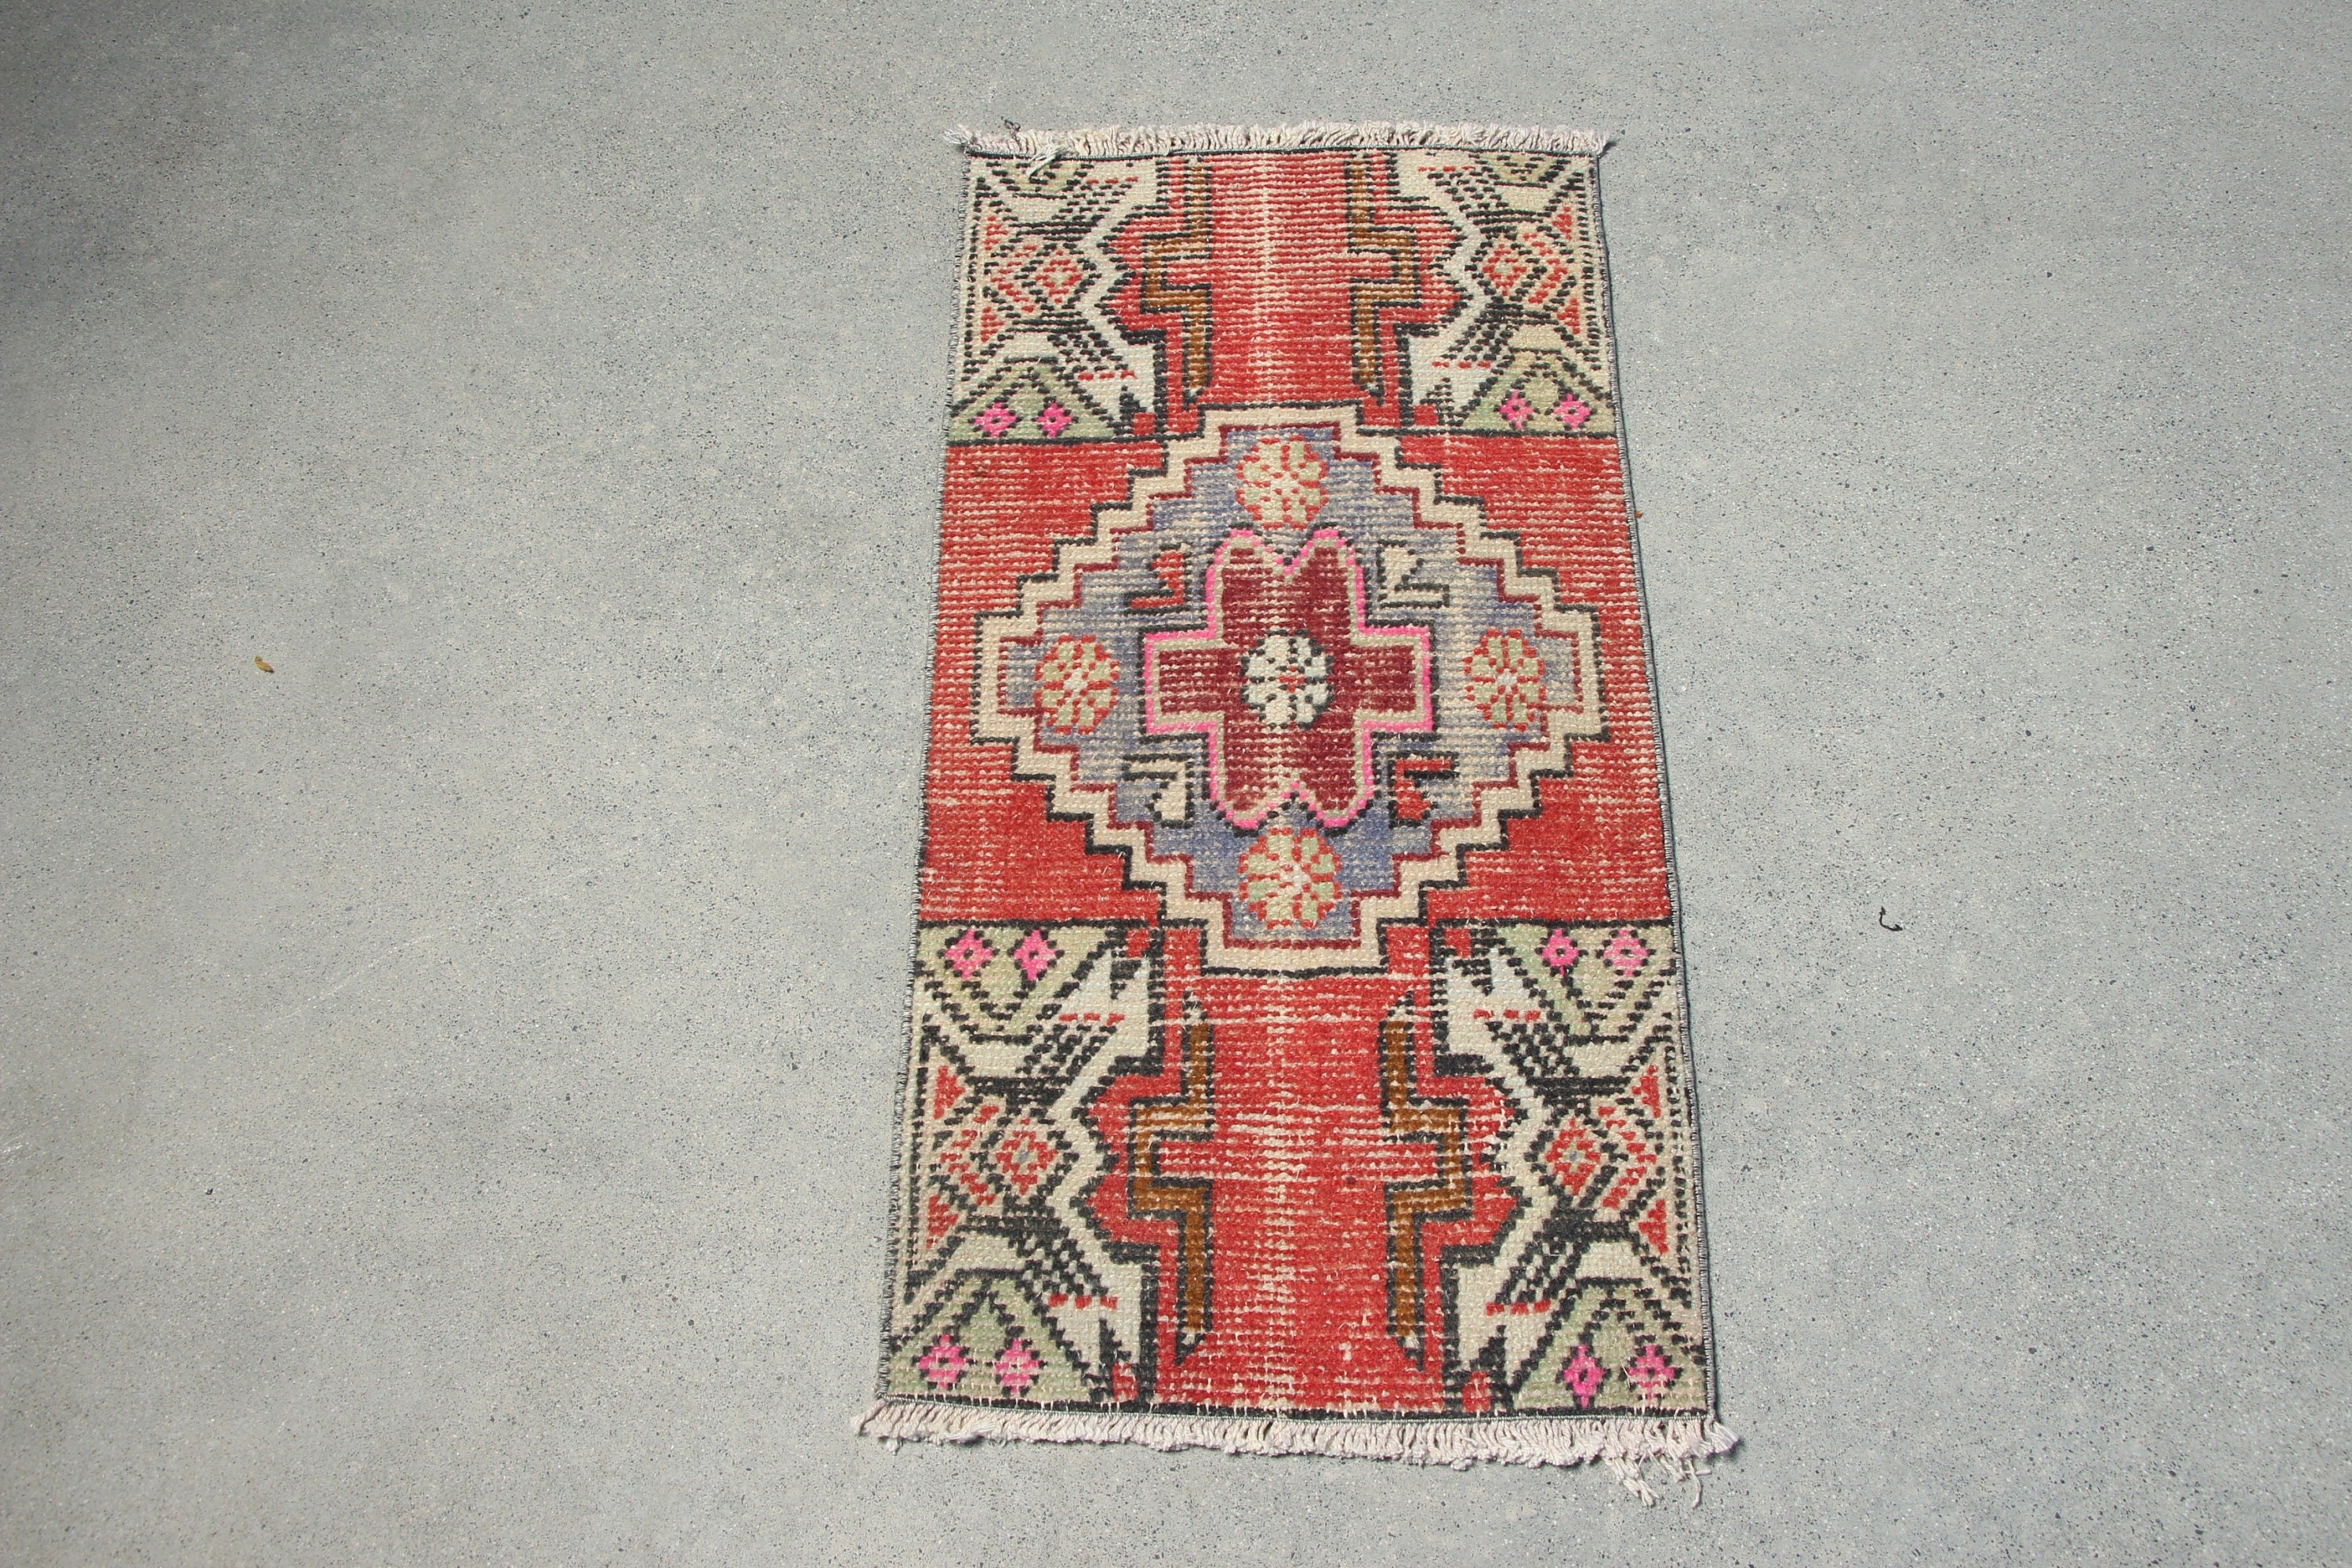 Wall Hanging Rugs, Cool Rug, 1.5x2.9 ft Small Rug, Rugs for Kitchen, Turkish Rug, Vintage Rug, Entry Rug, Red Oriental Rugs, Kitchen Rug